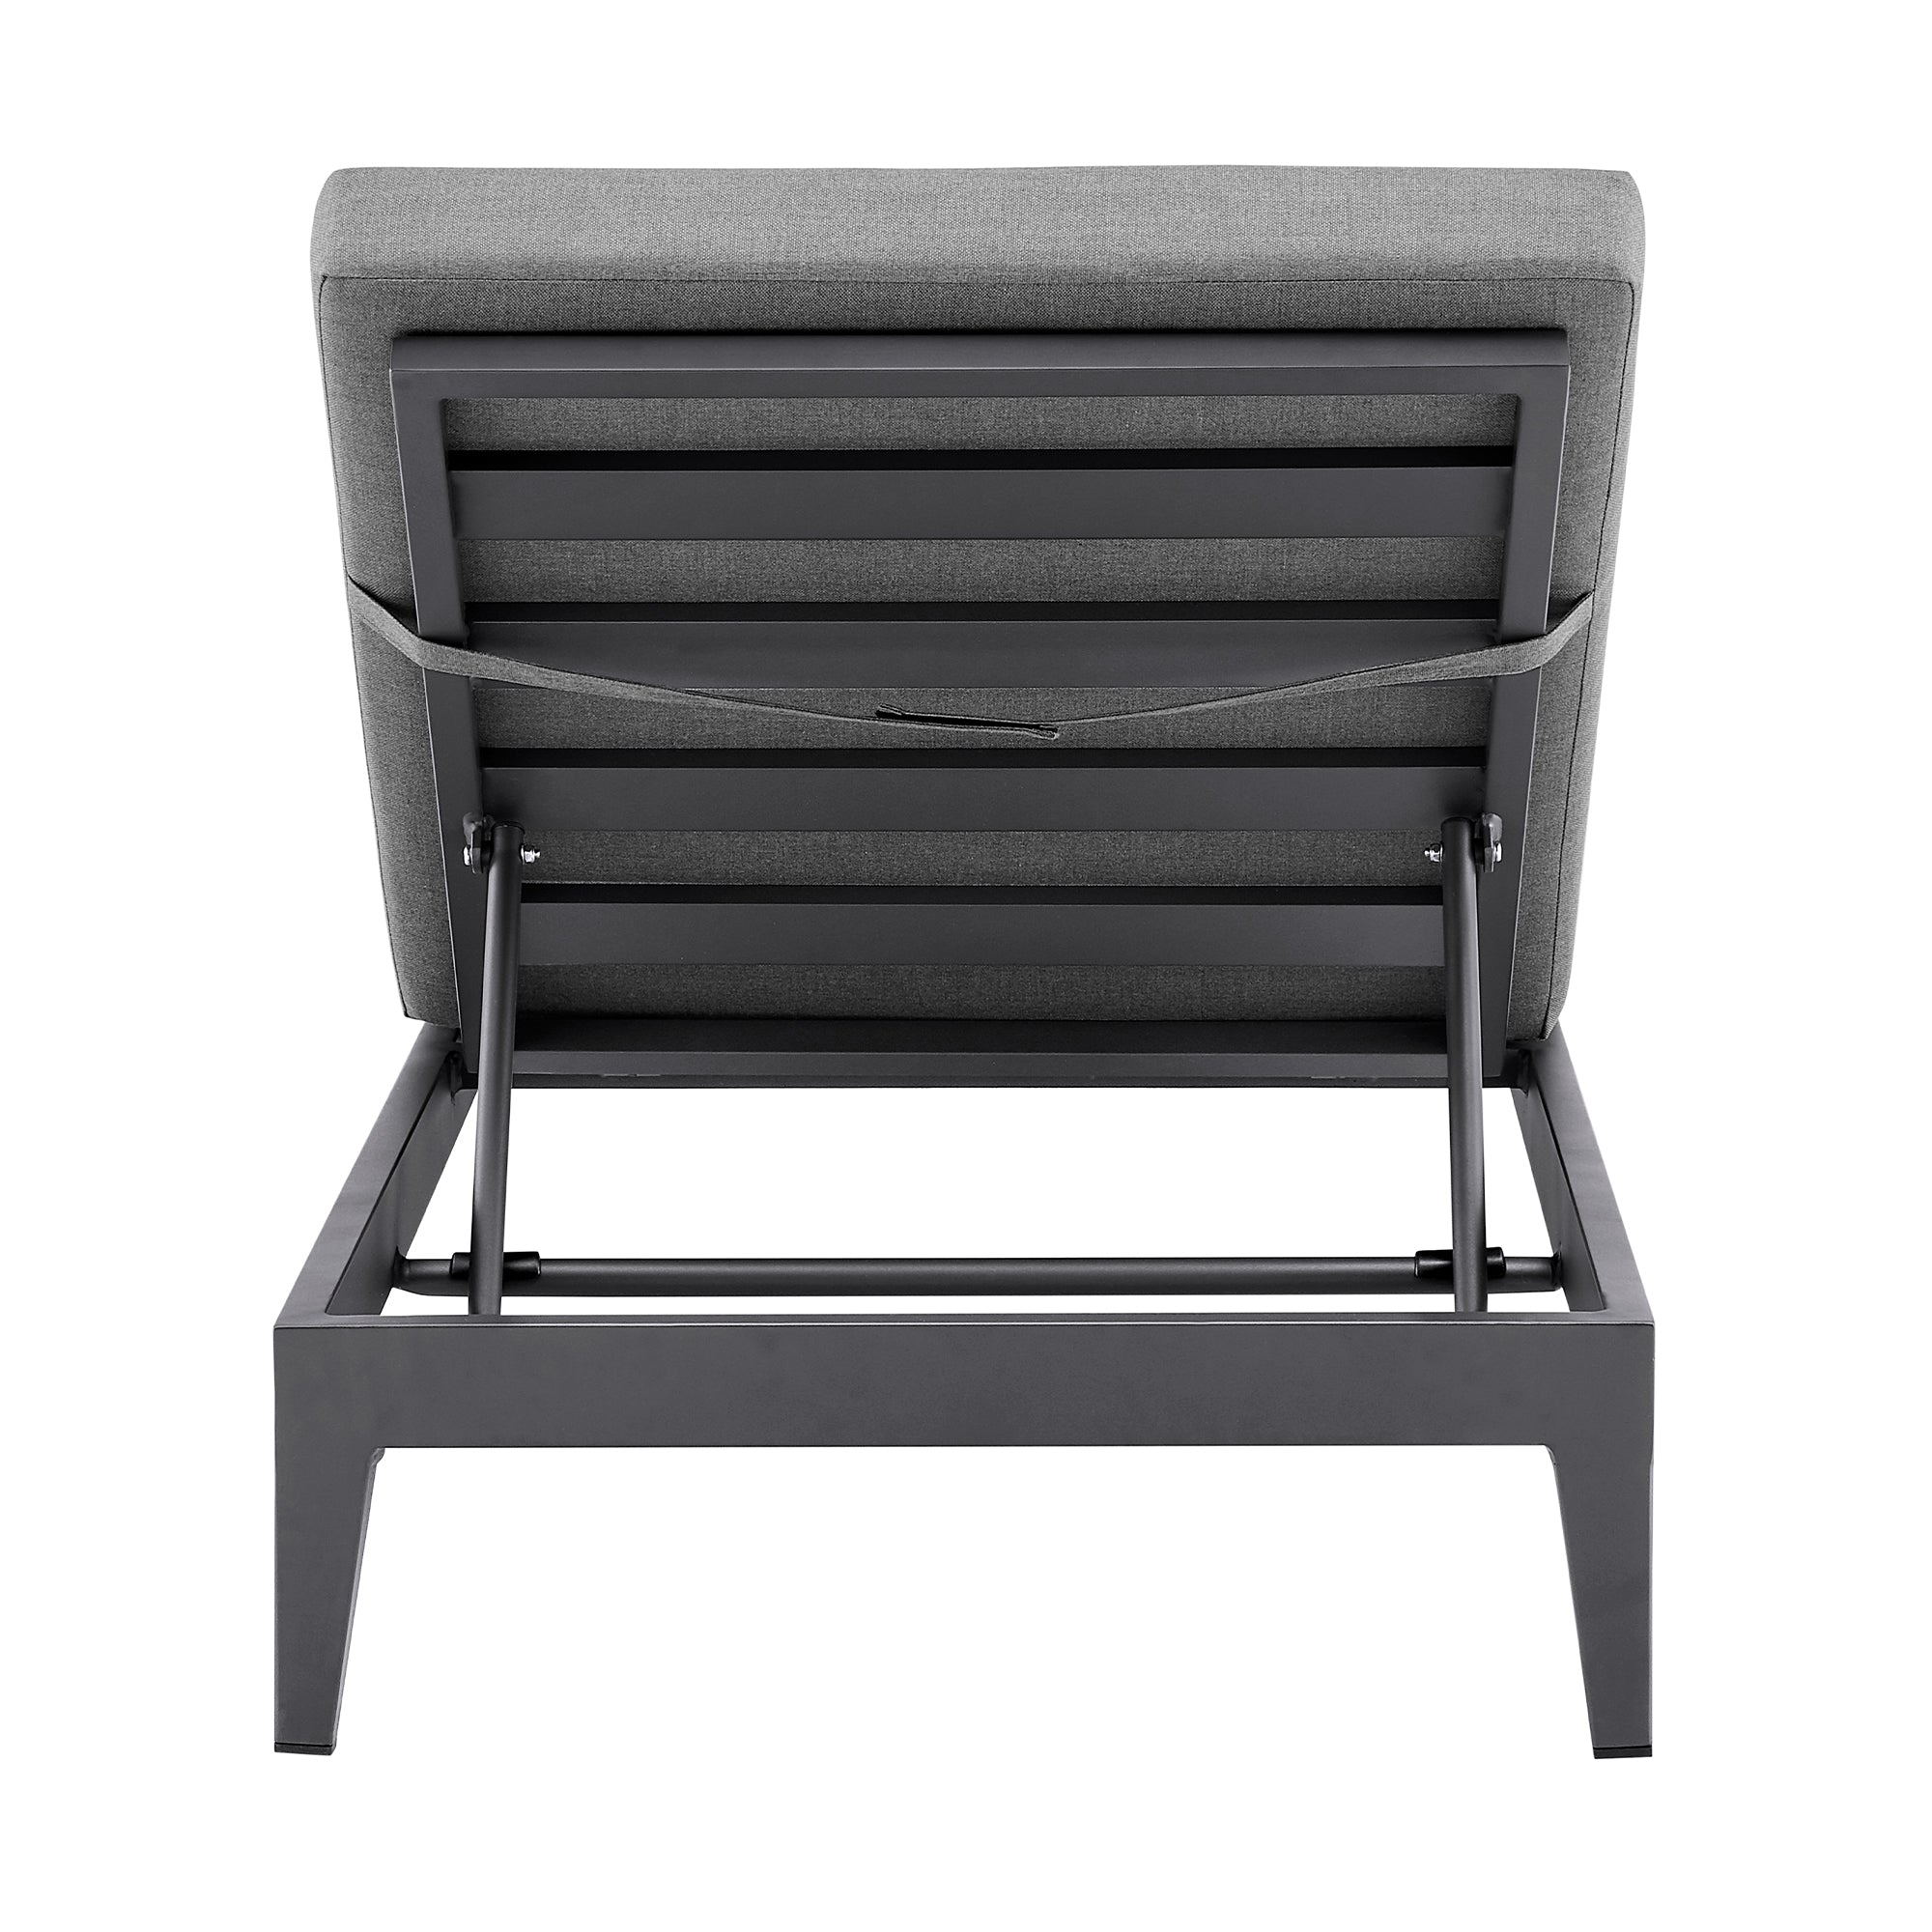 Armen Living - Argiope Outdoor Patio Adjustable Chaise Lounge Chair in Aluminum with Grey Cushions - 840254333017